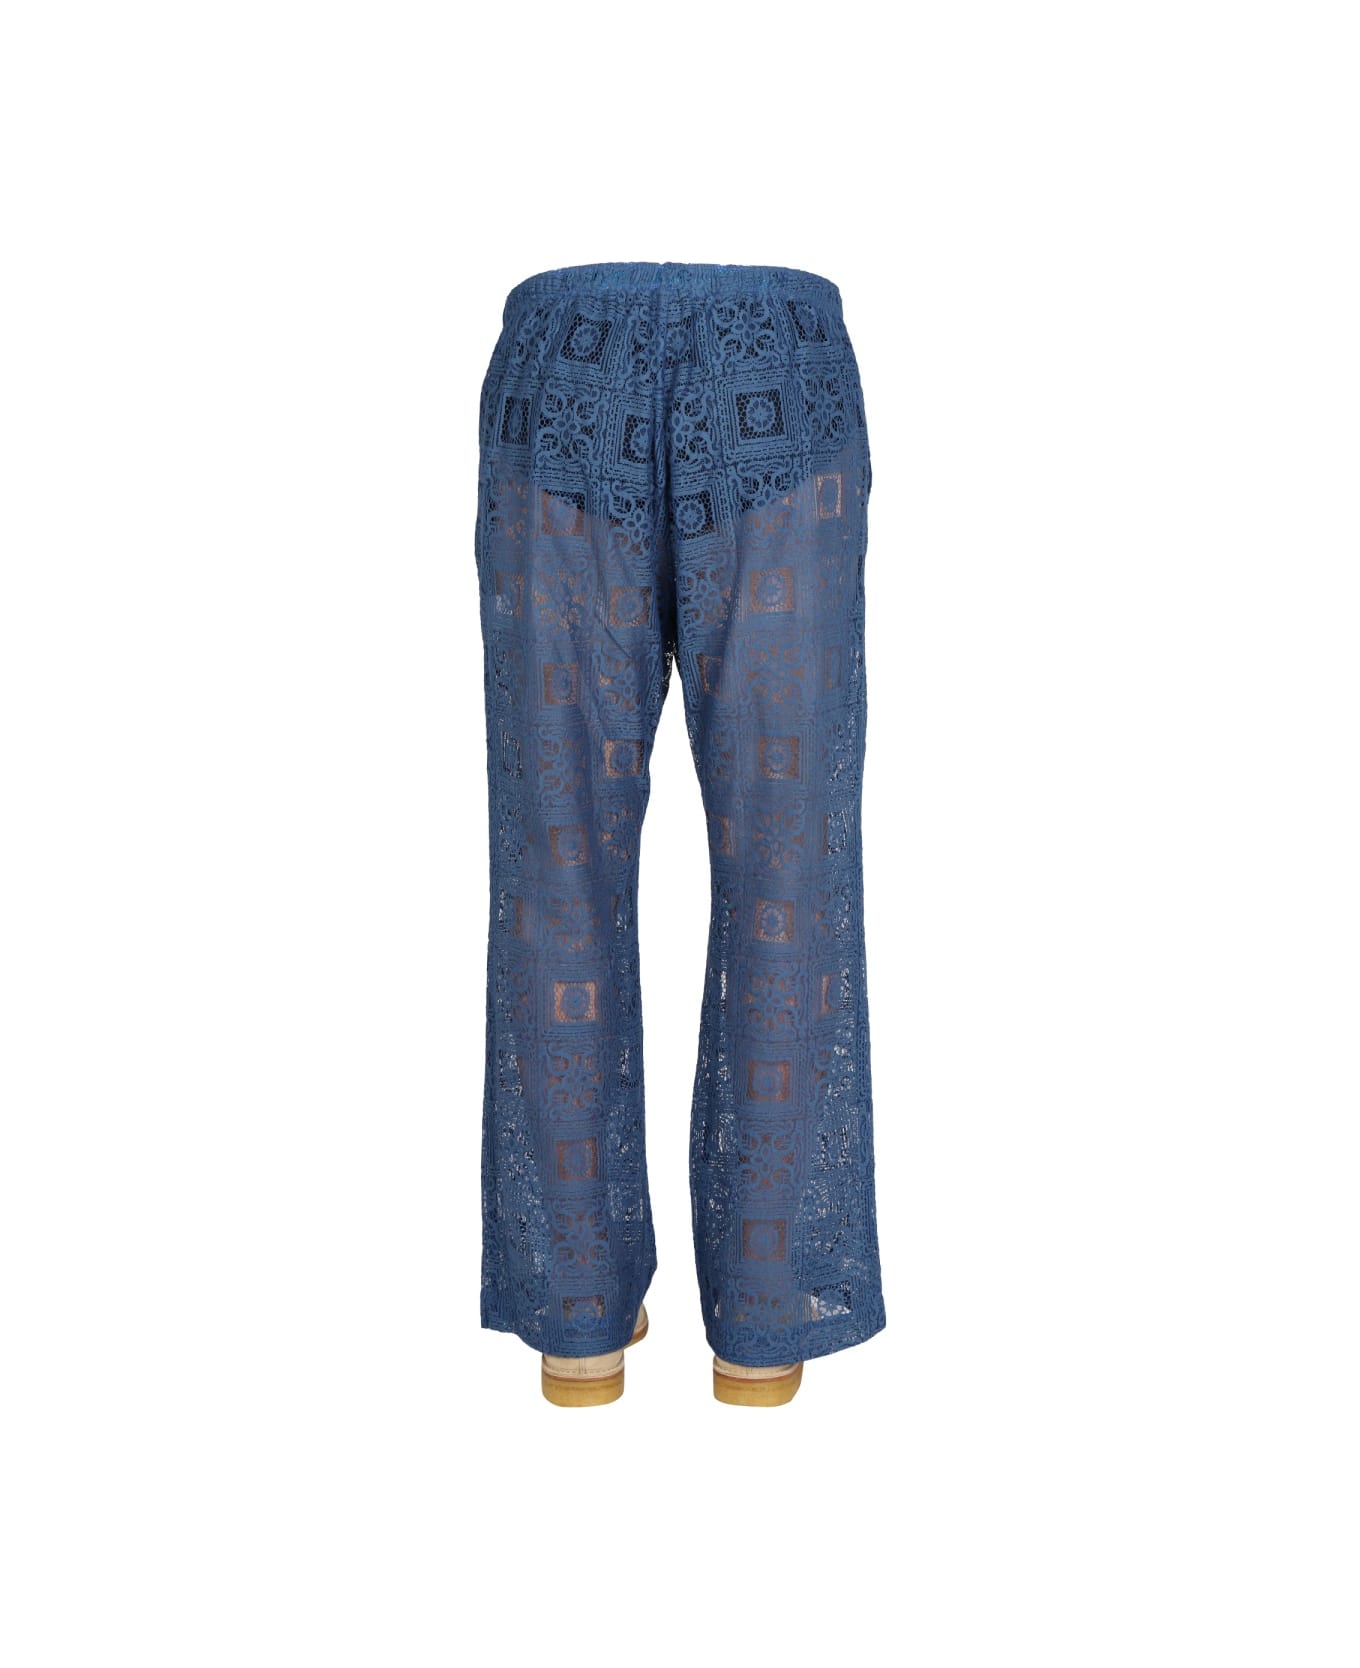 Needles Knit Trousers - BLUE